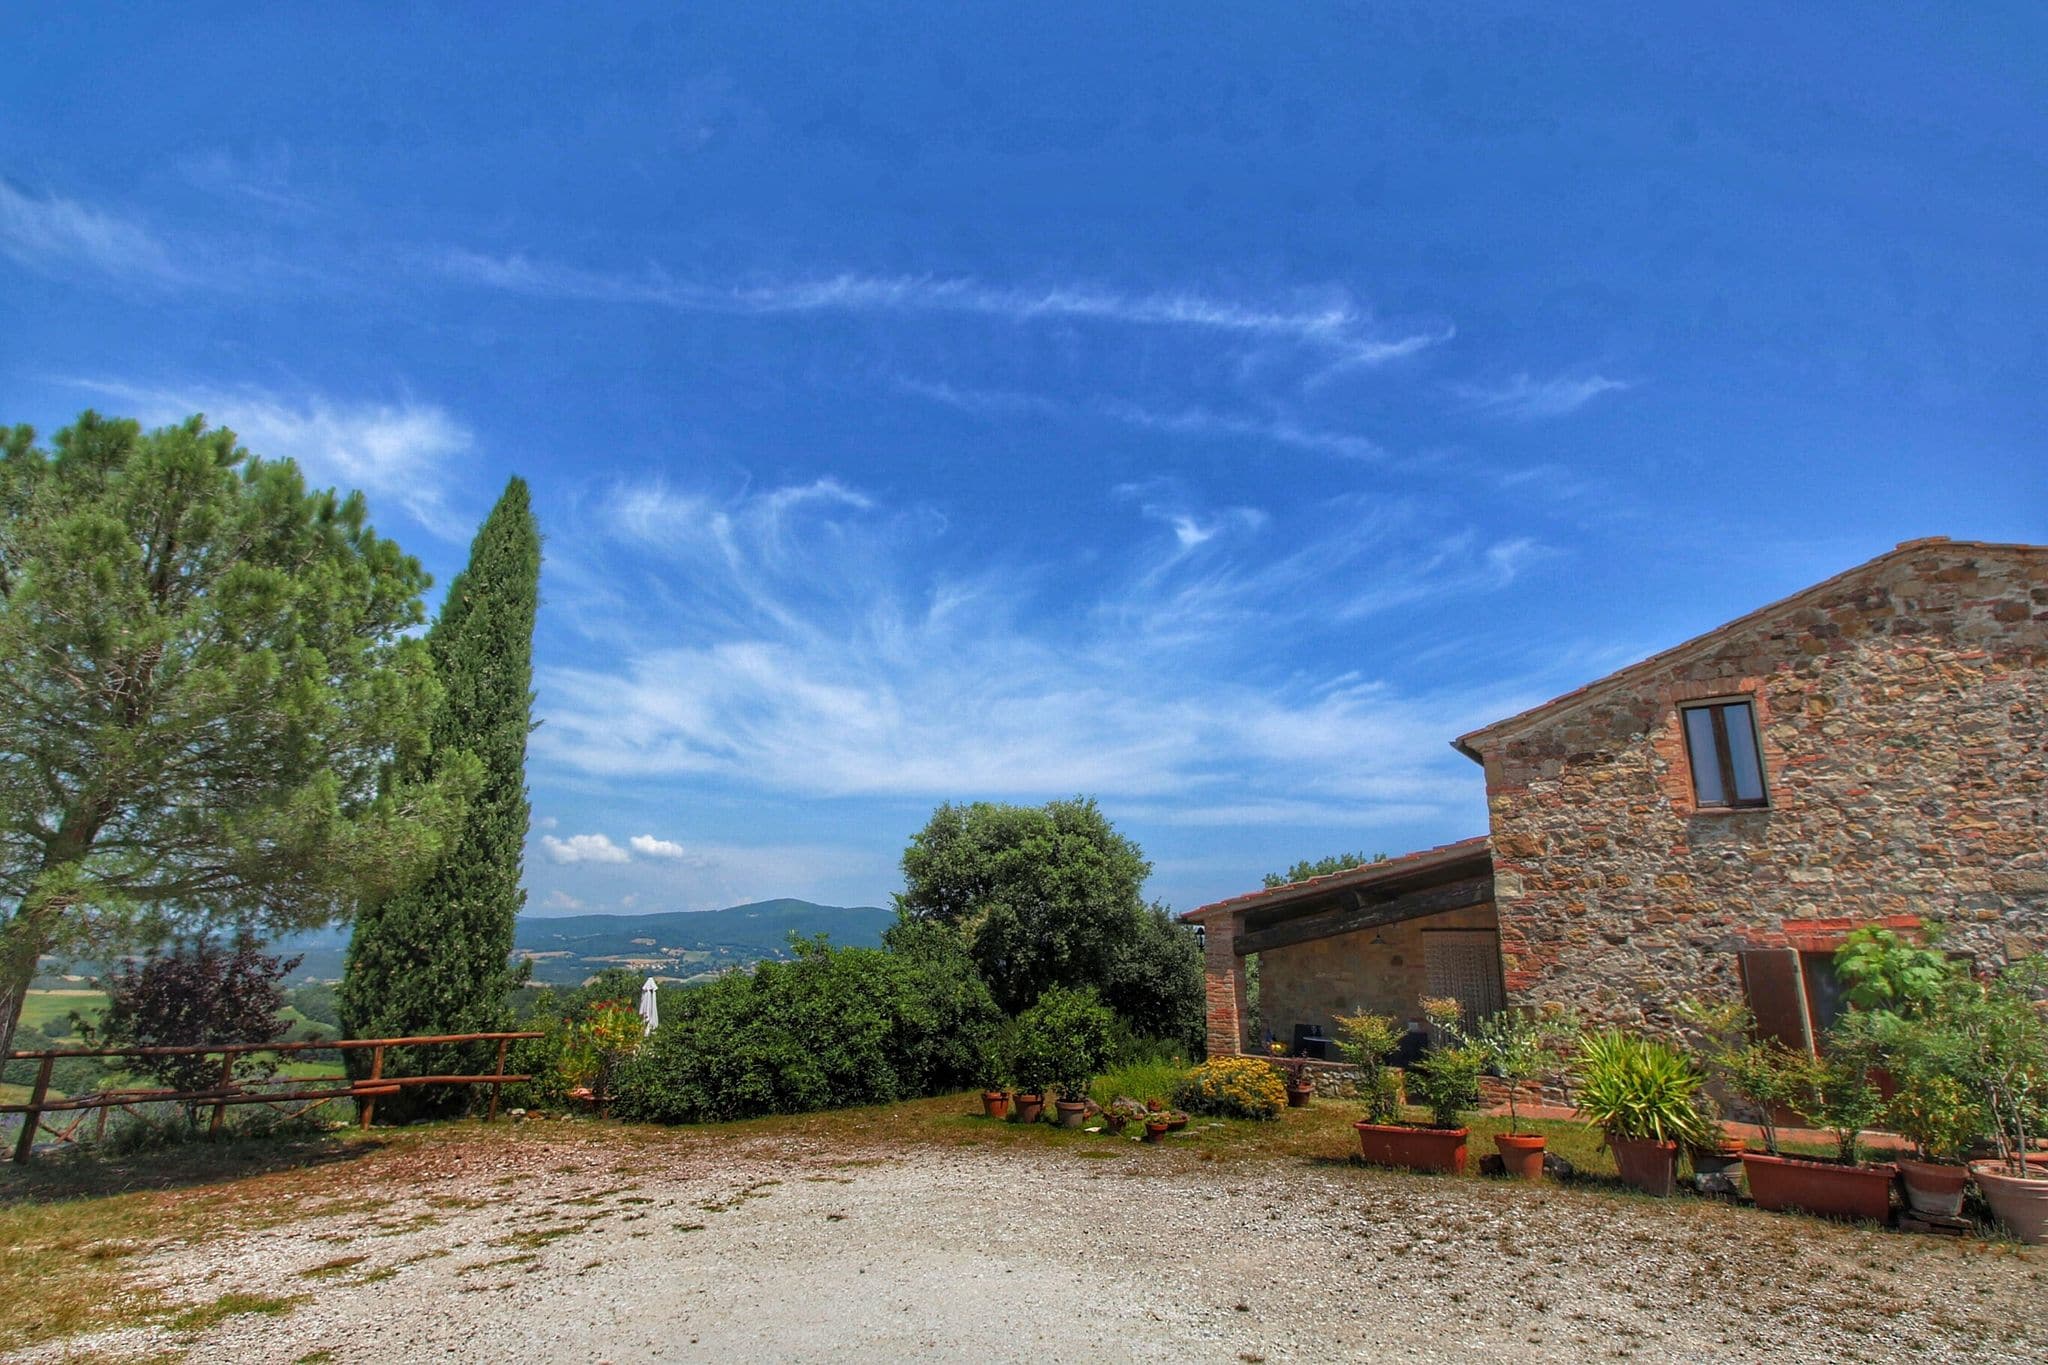 Elegant Cottage in Tuscany with Lake View and Private Garden